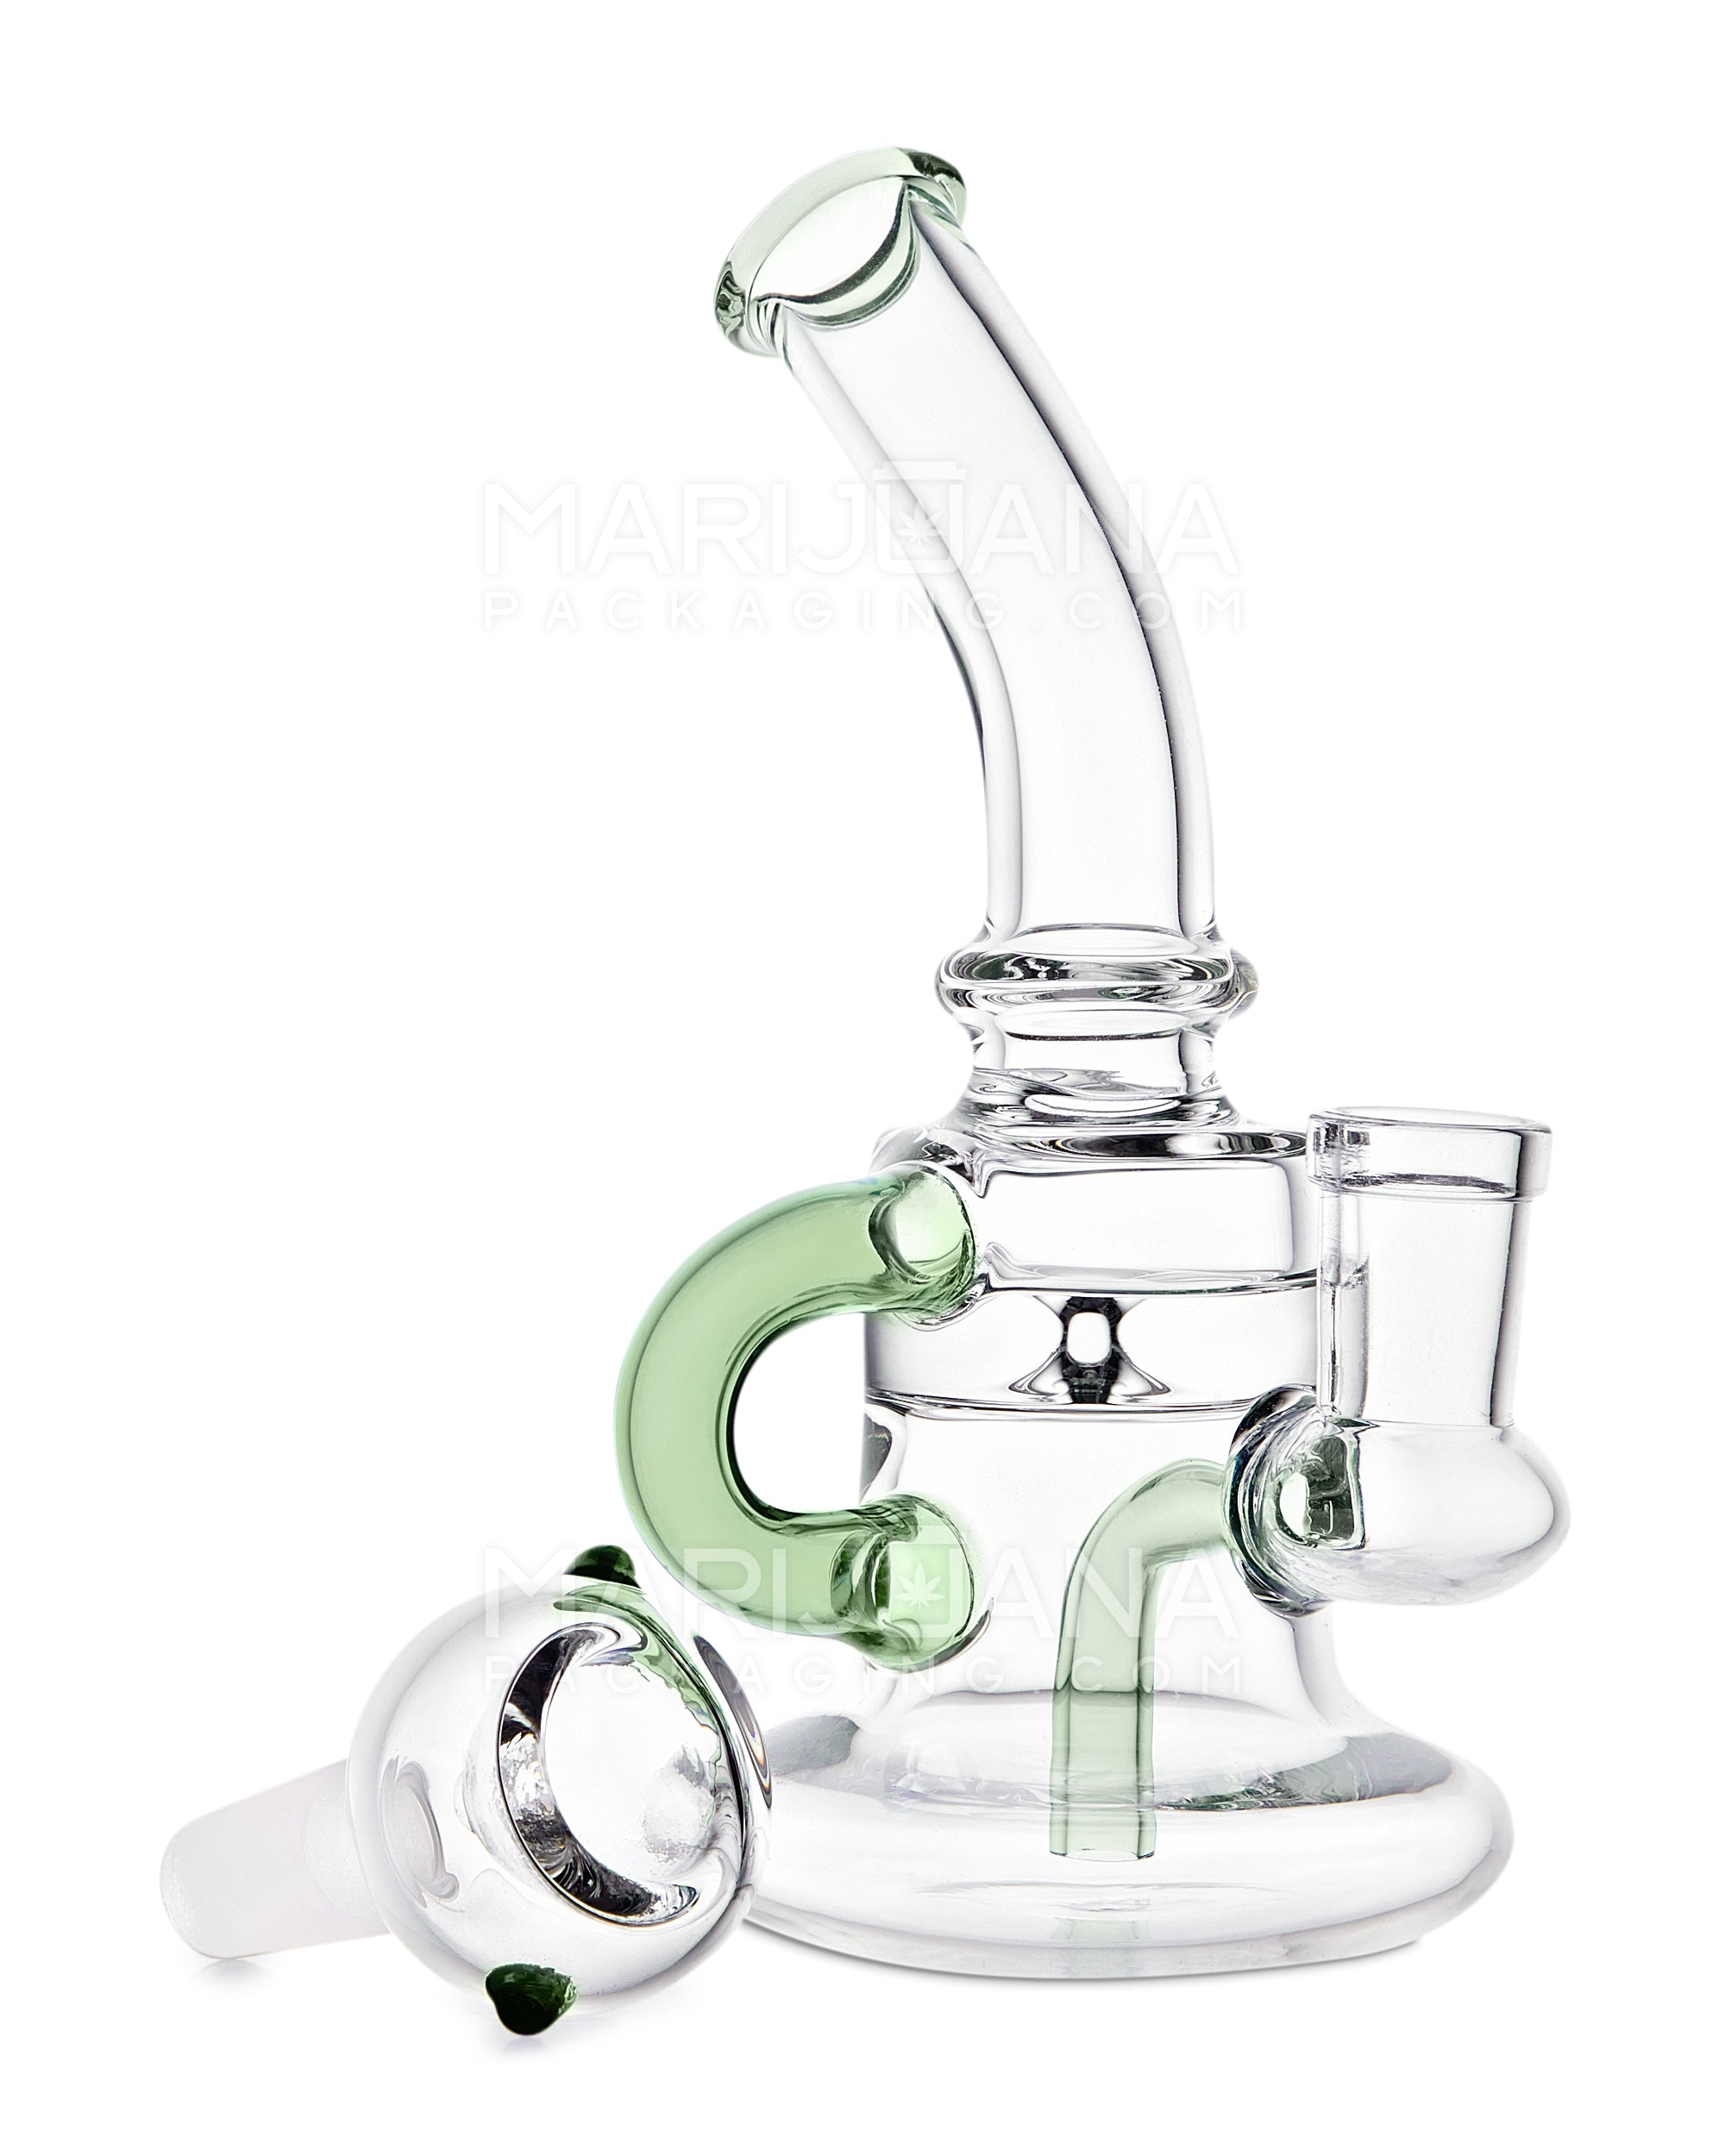 Bent Neck Single Uptake Recycler Water Pipe w/ Honeycomb Bowl | 5.5in Tall - 14mm Bowl - Green